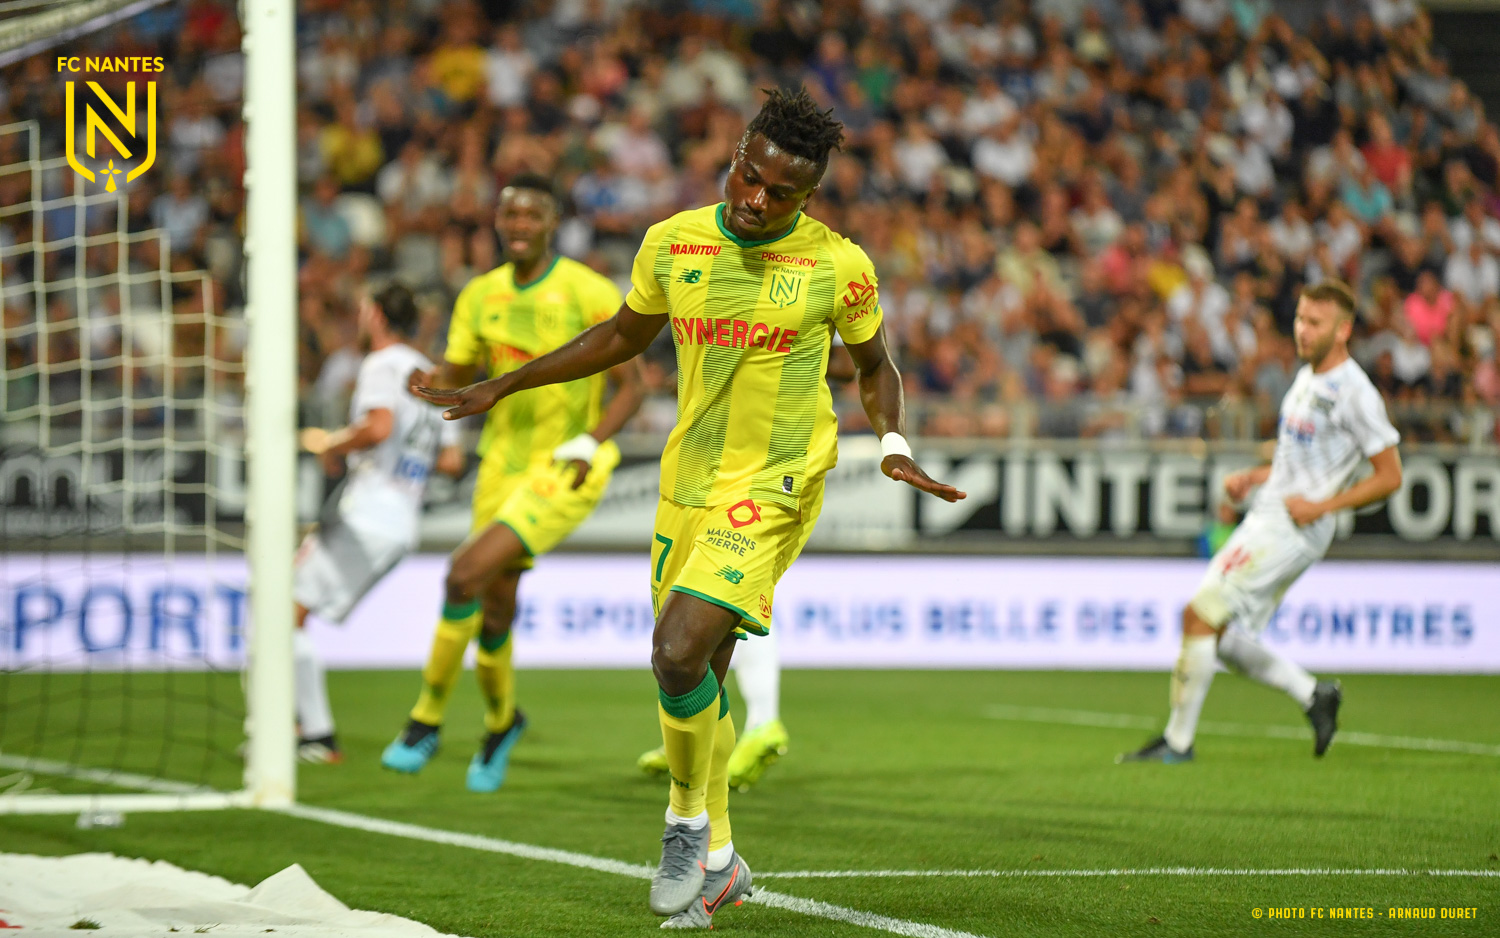 Simon Eager To Shine For Nantes With Improved Form